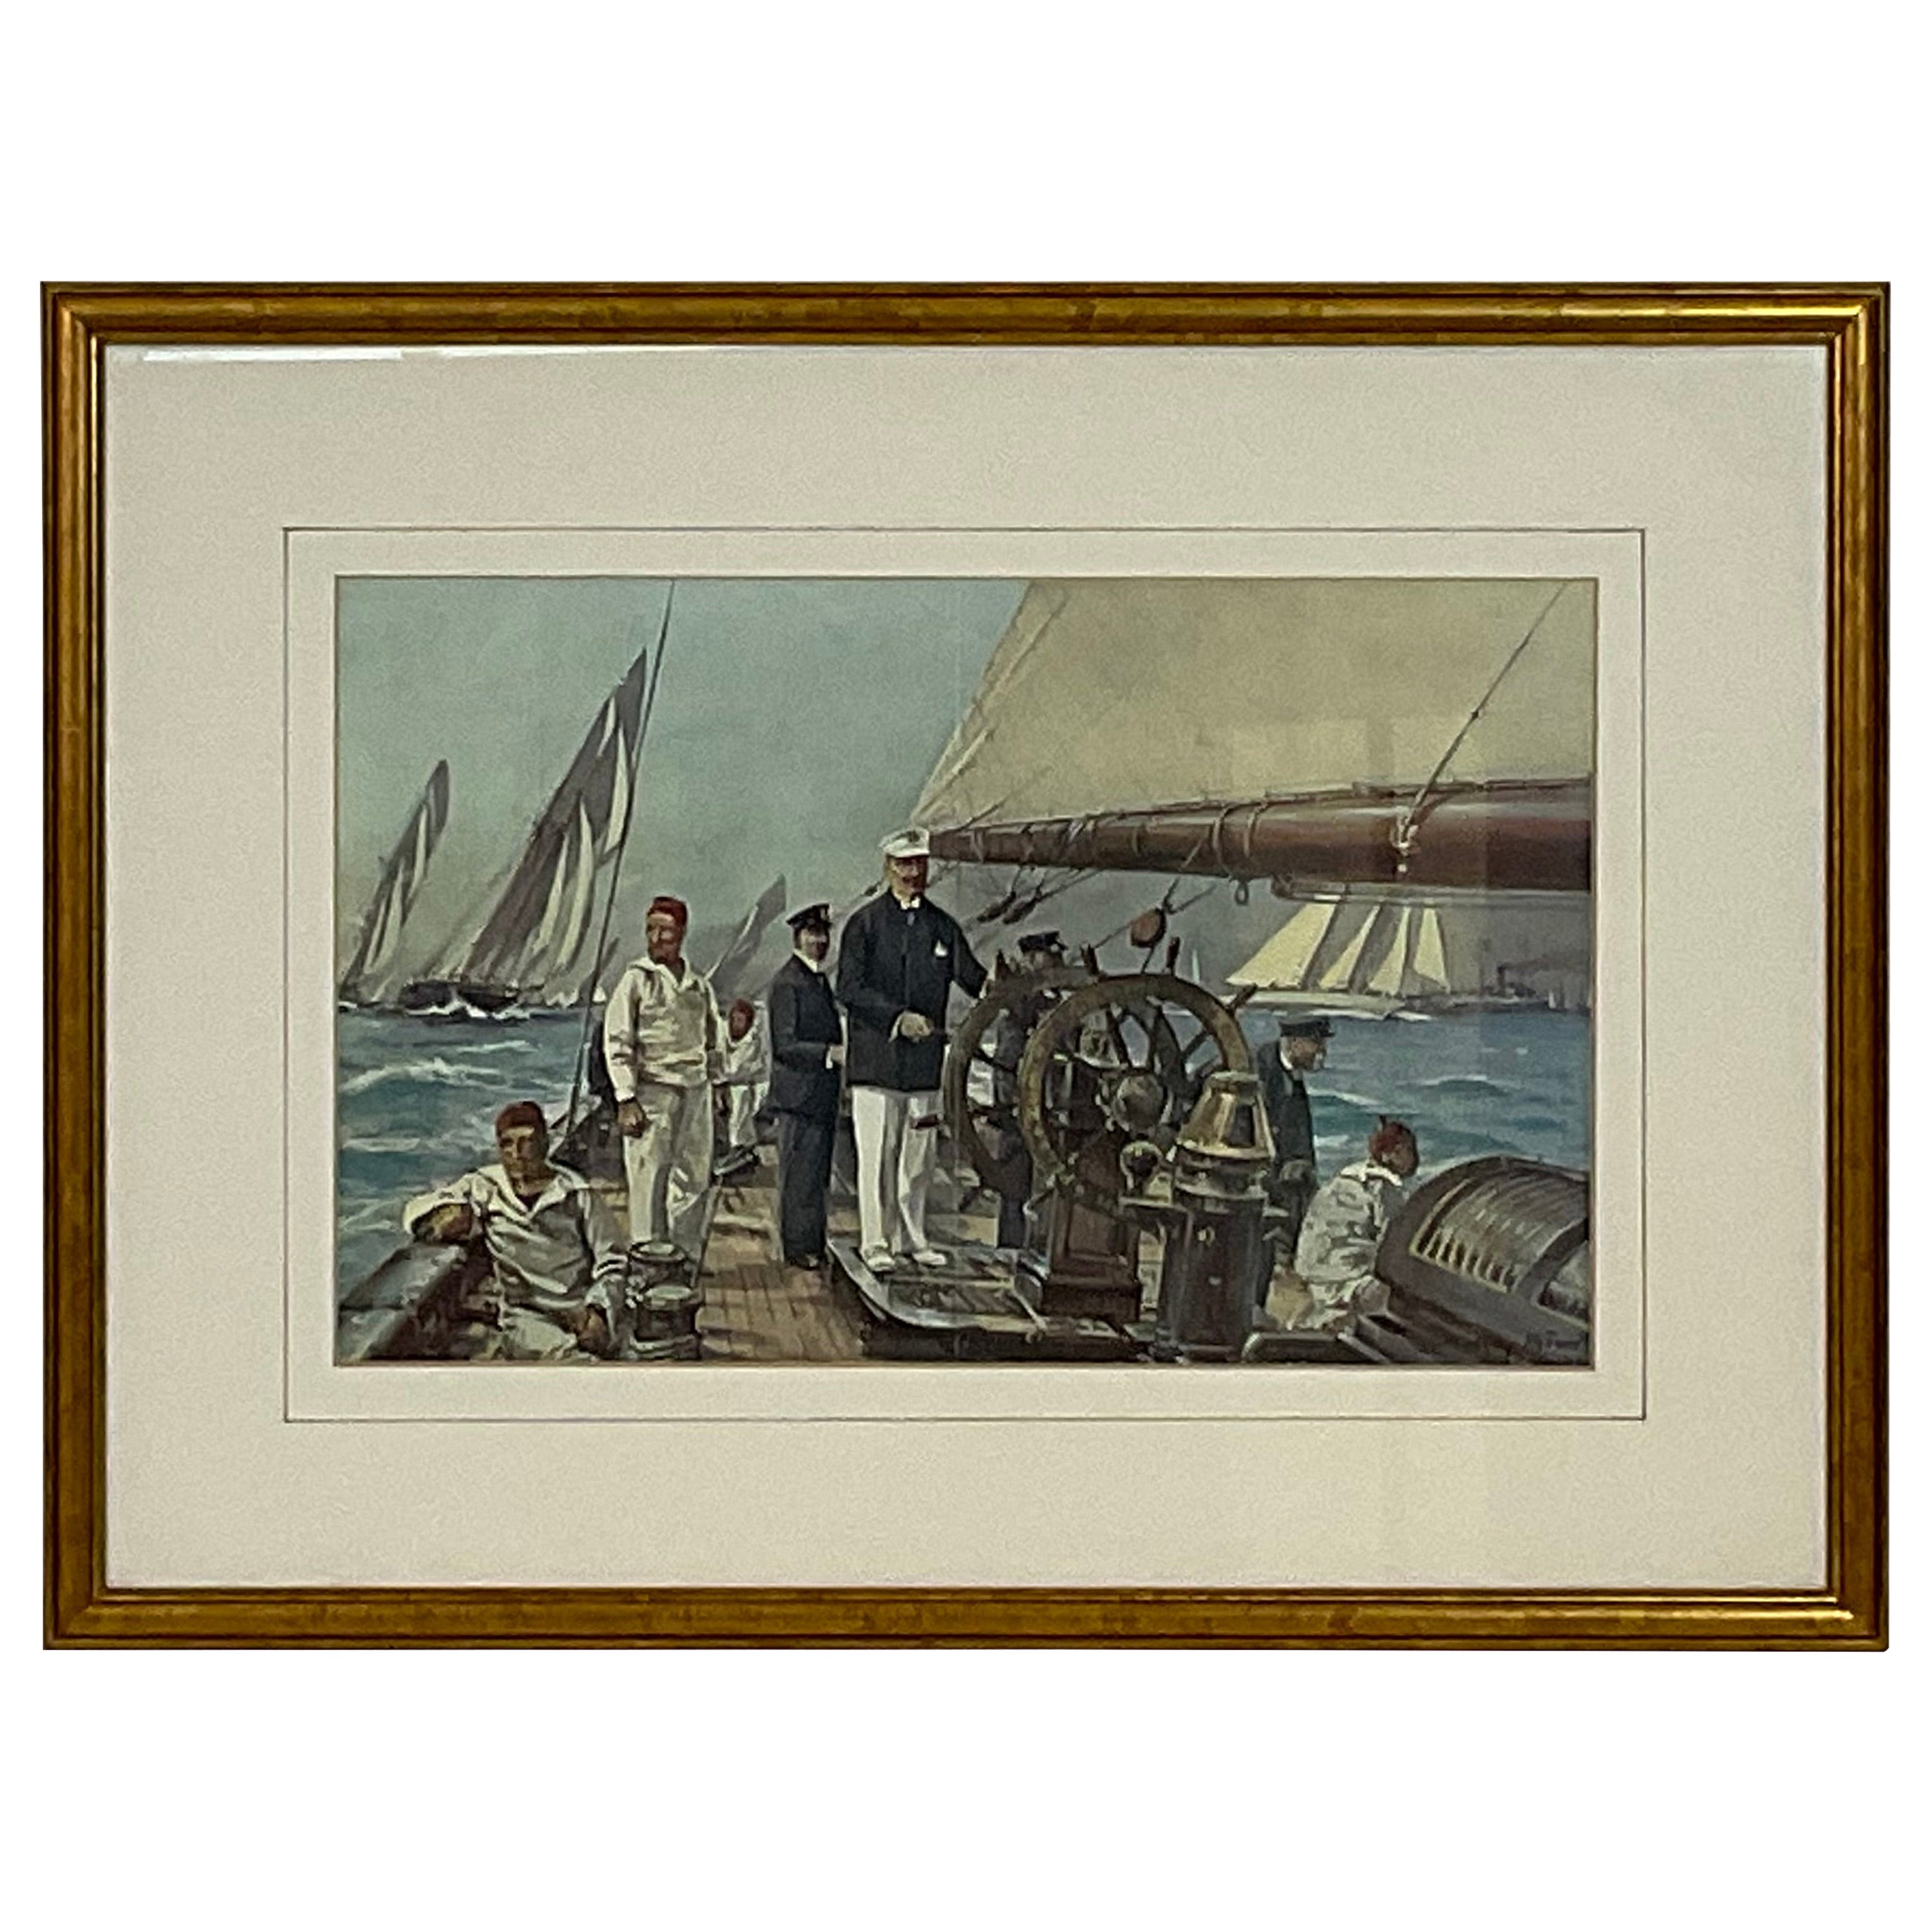 Yachting Print showing Yacht Meteor